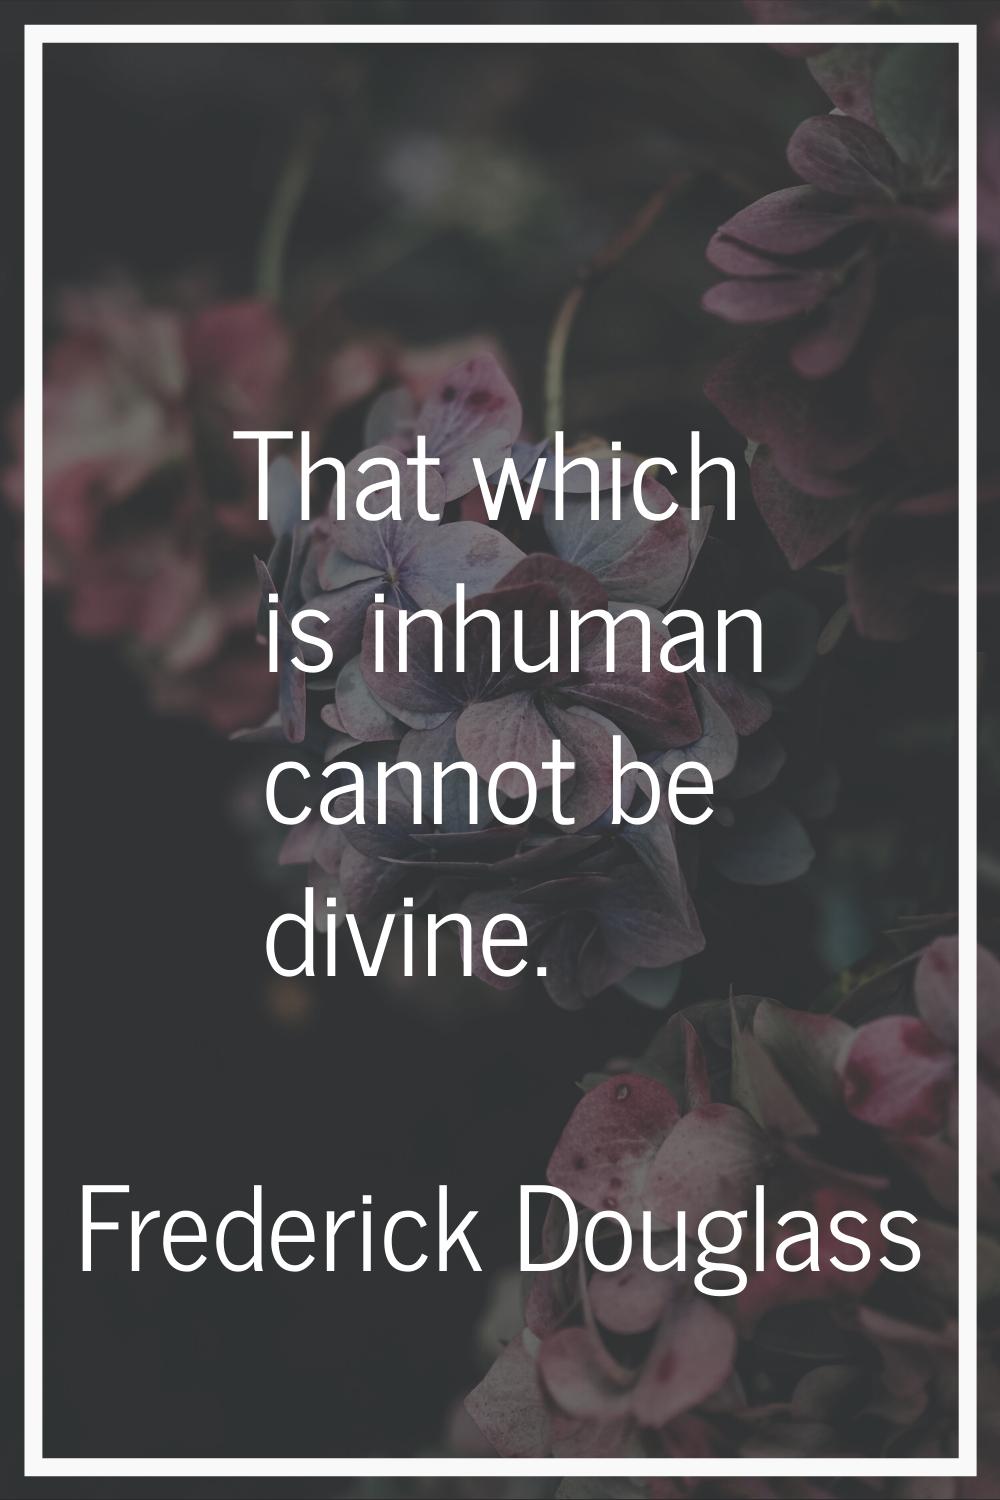 That which is inhuman cannot be divine.